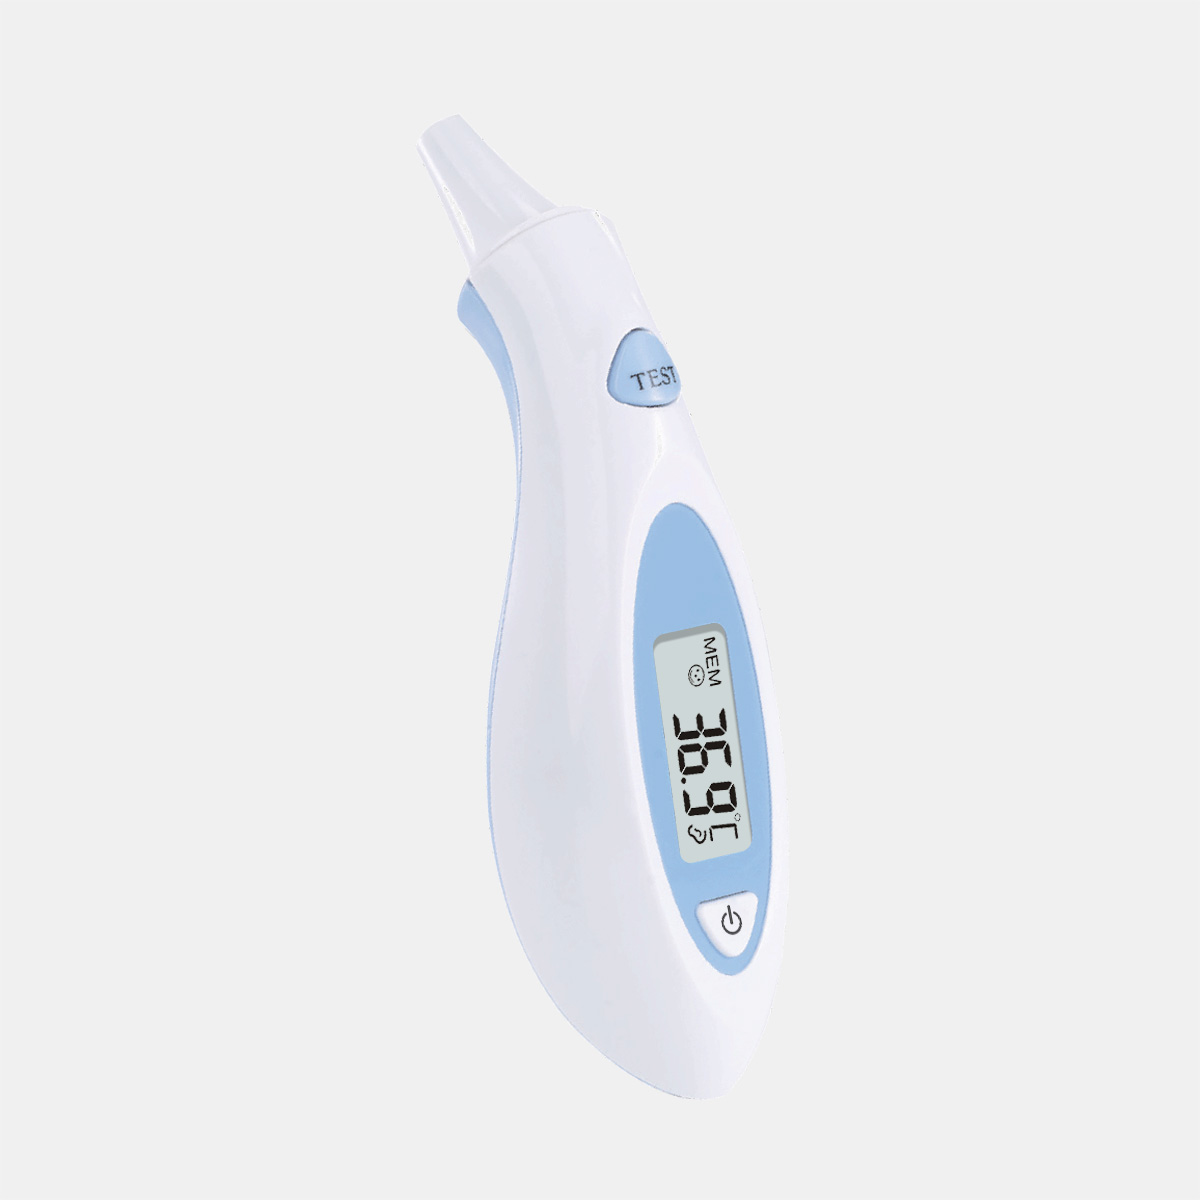 Sejoy Home Use Basic Ear Thermometer per Baby Infrared Fever Thermometer Approvazione CE MDR